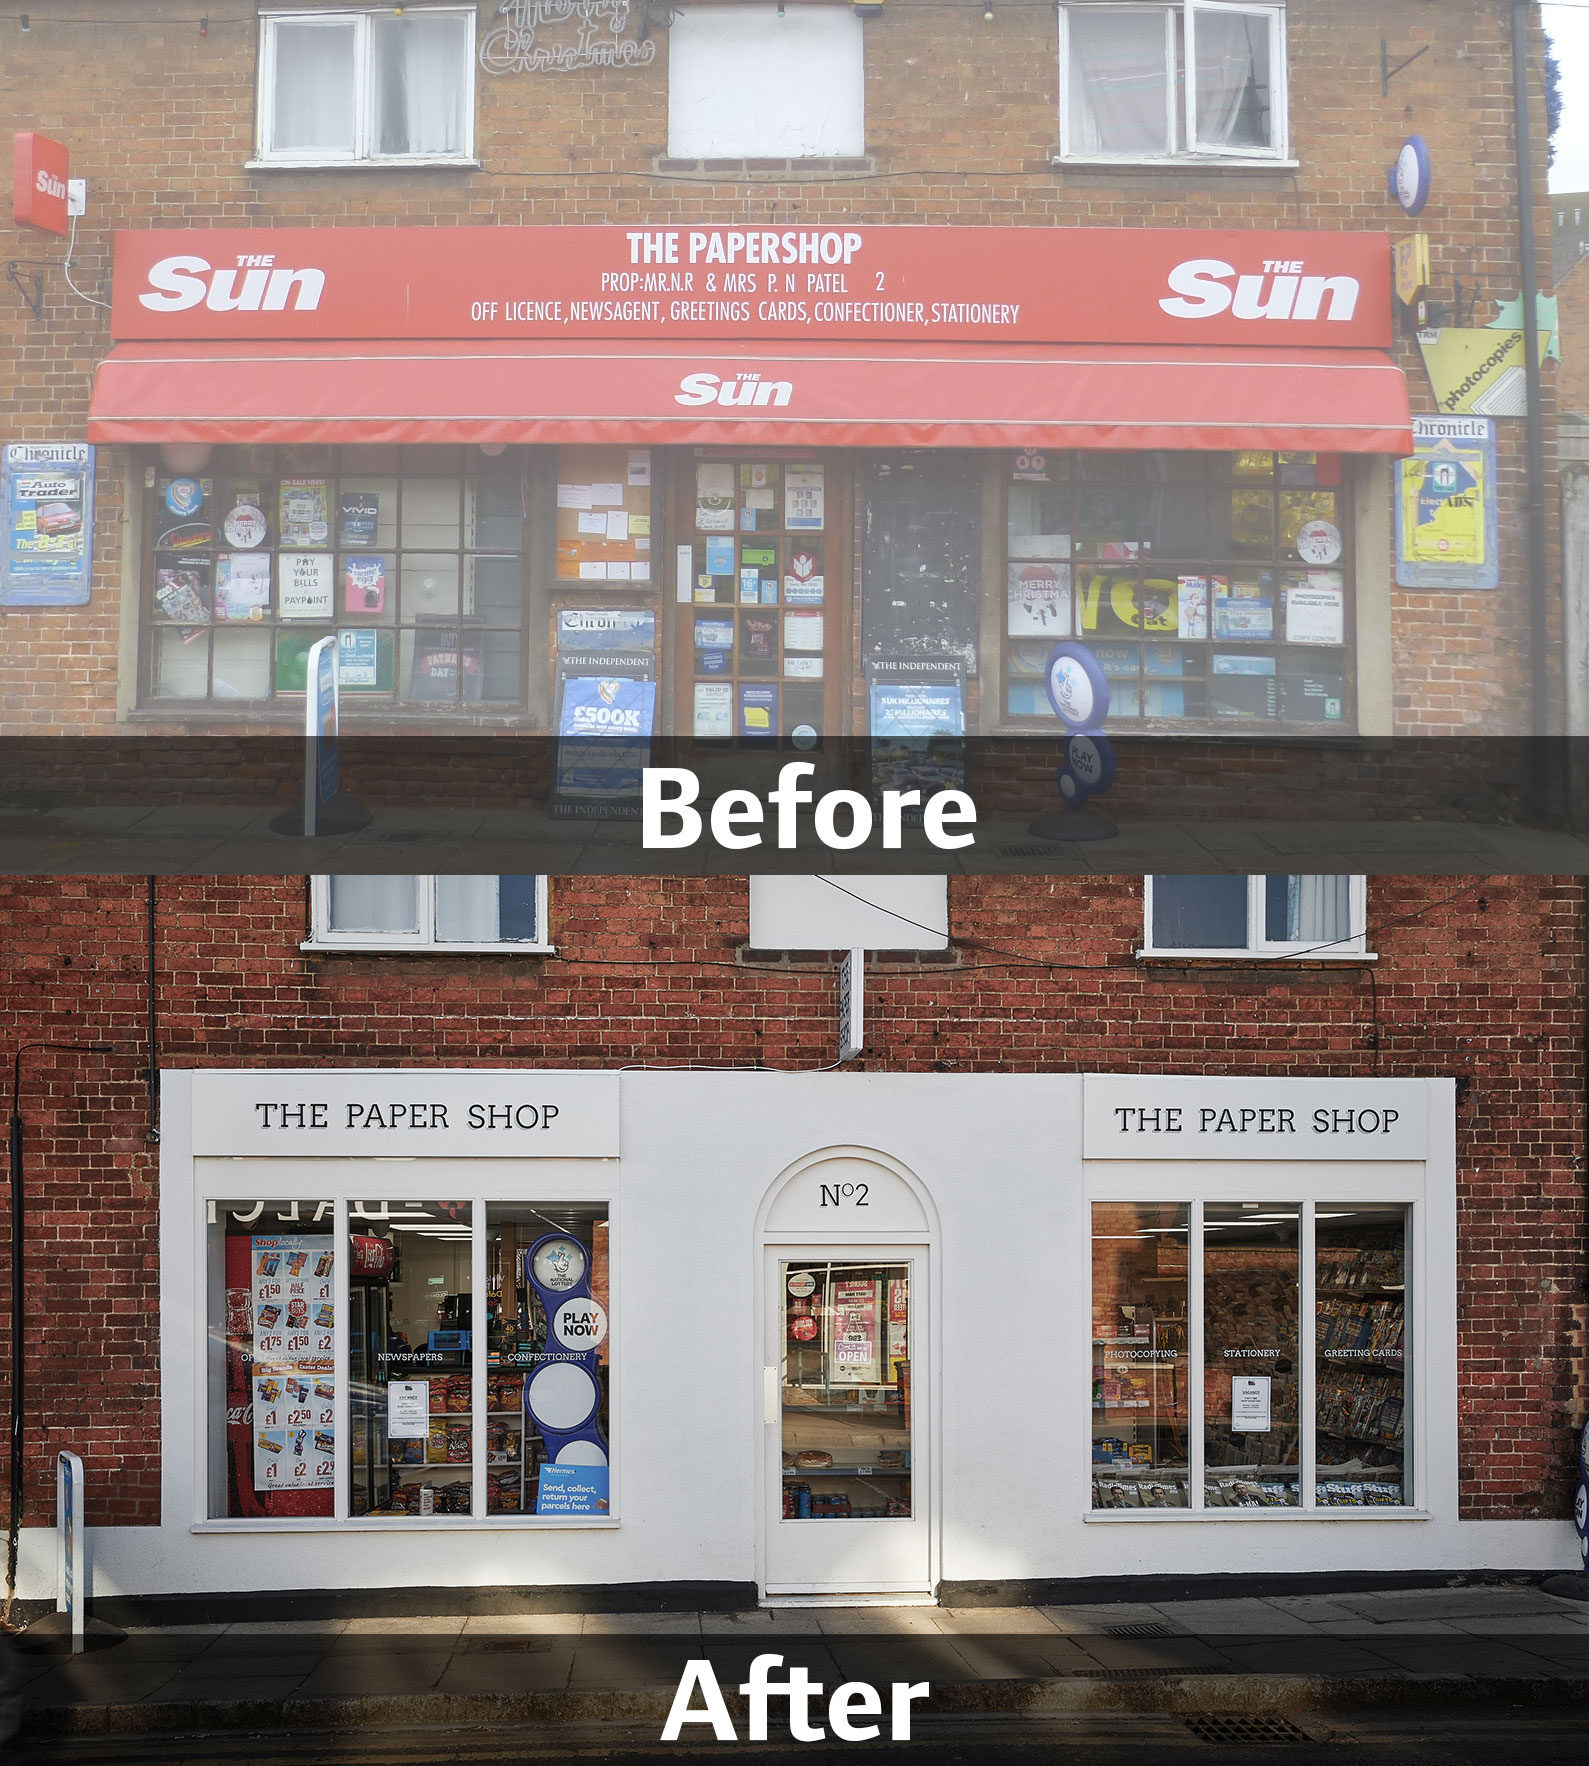 Shefford Paper Shop, before and after